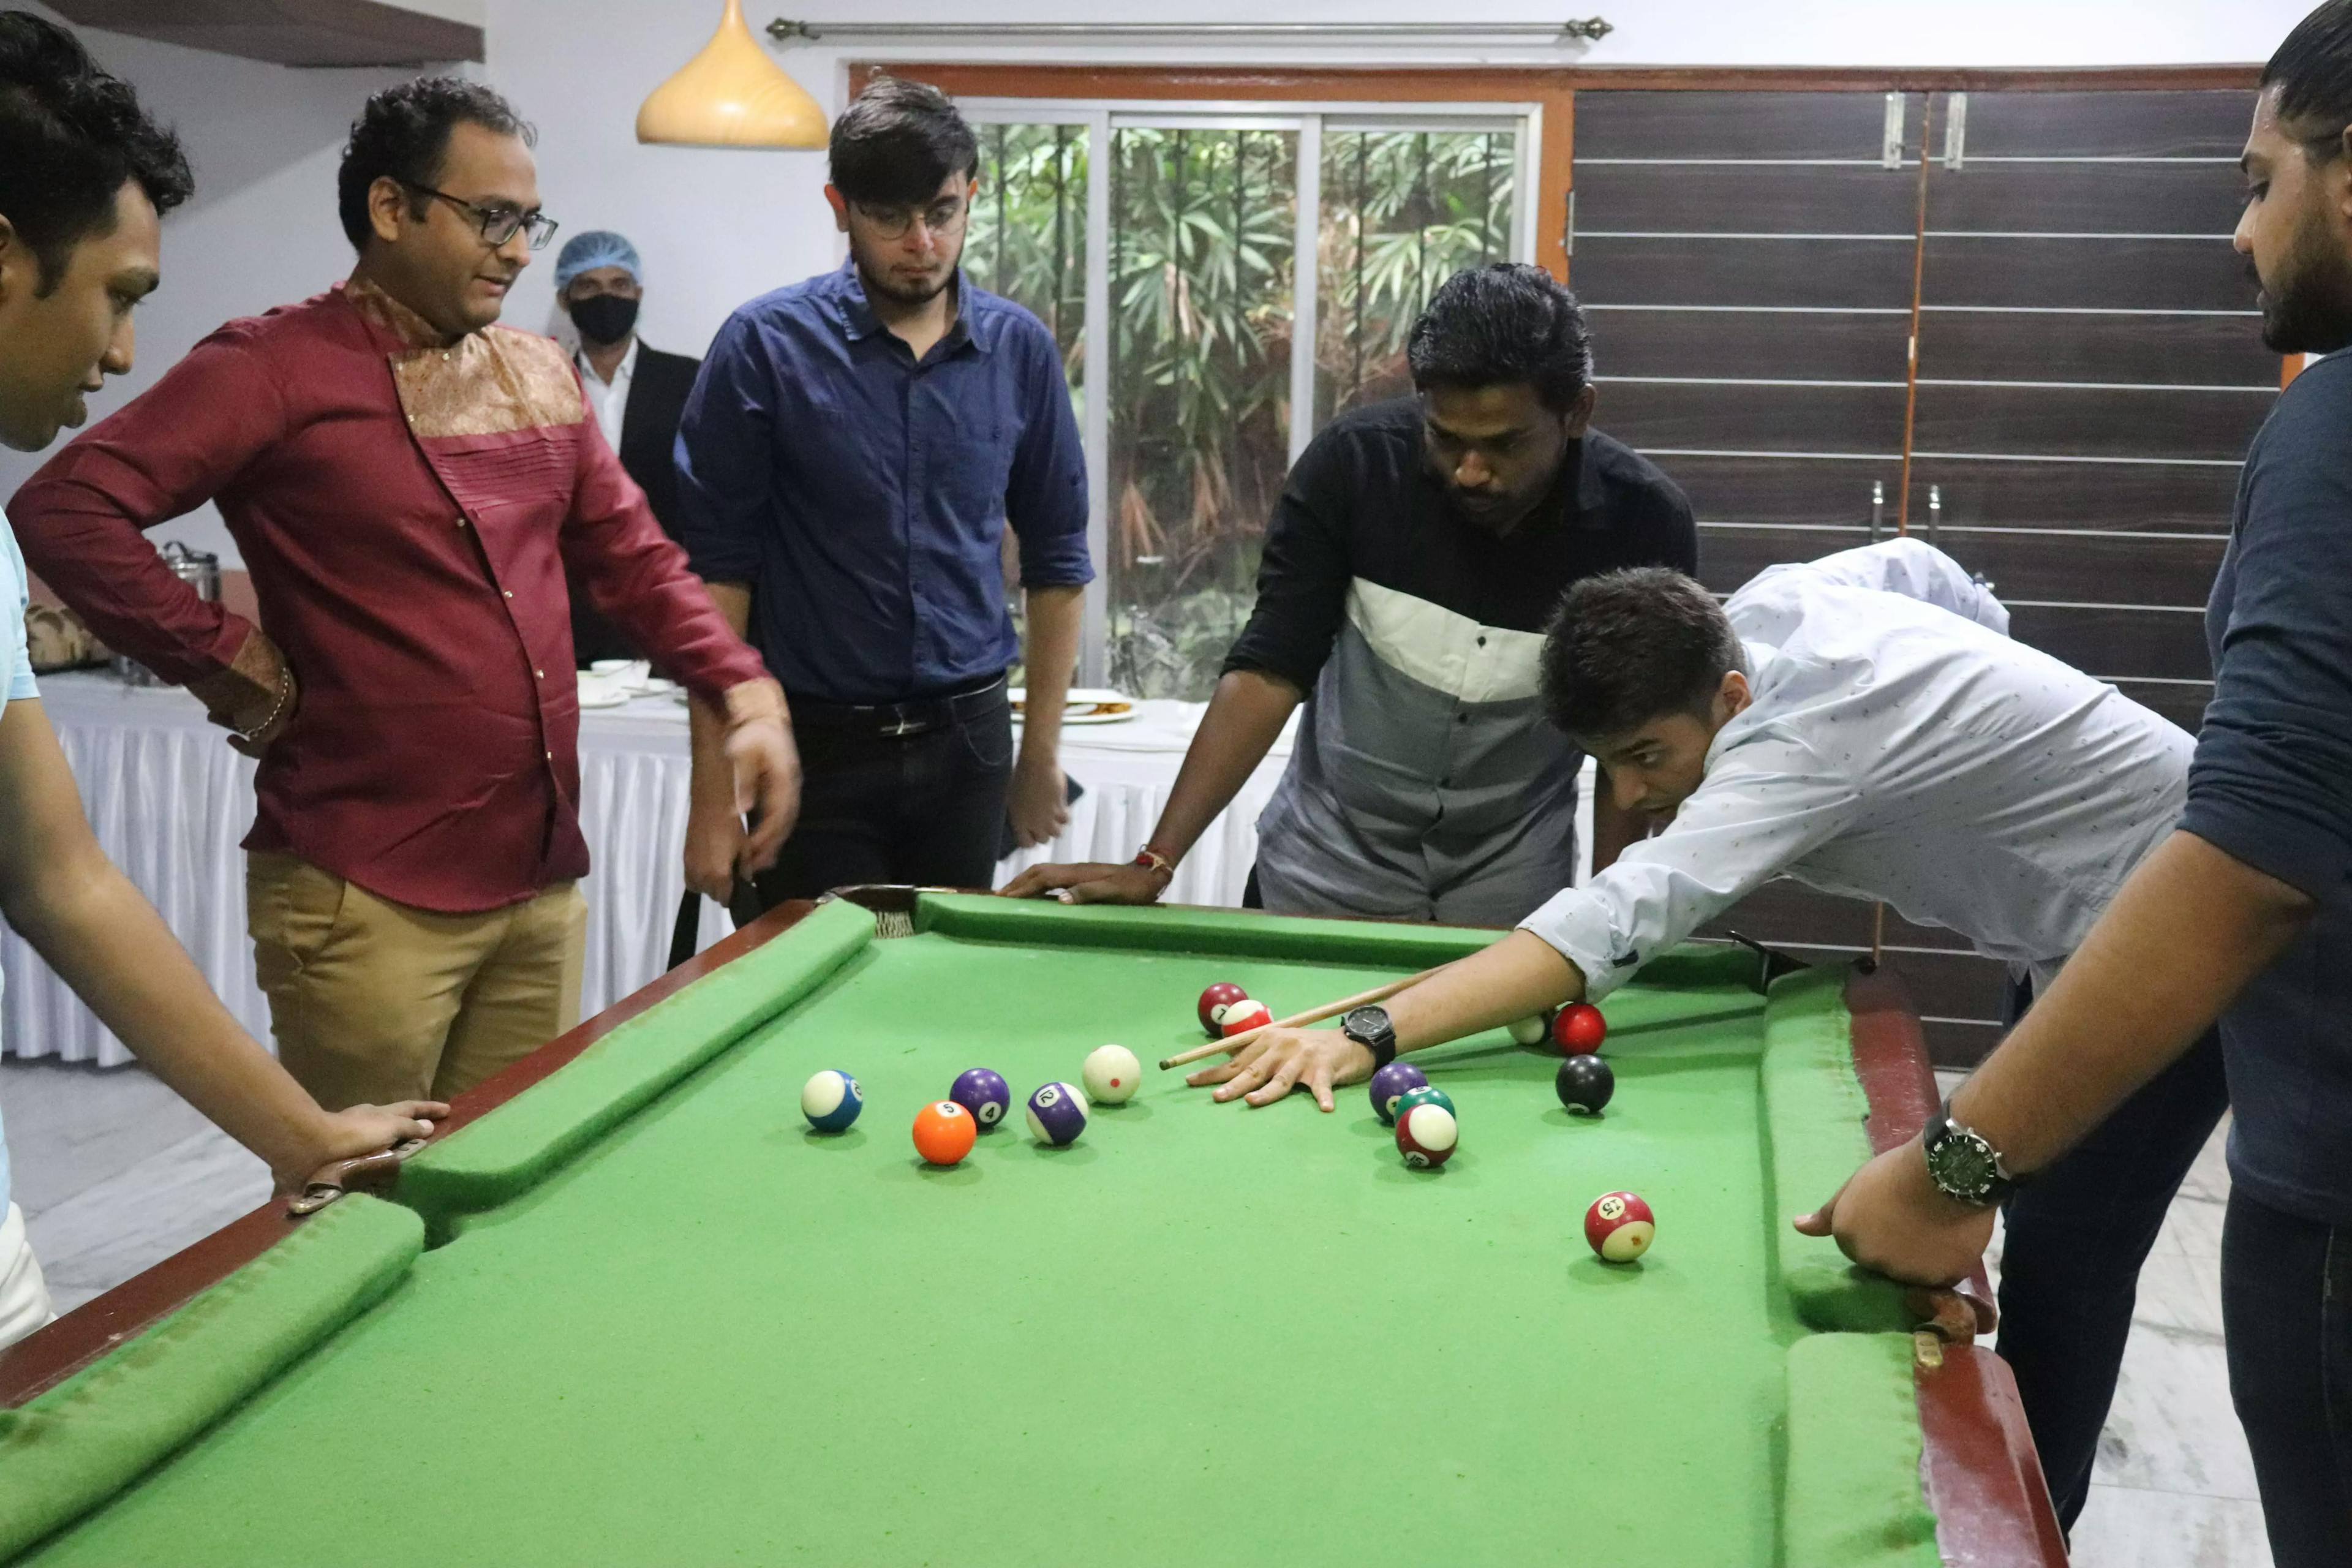 Deuex snooker game competition